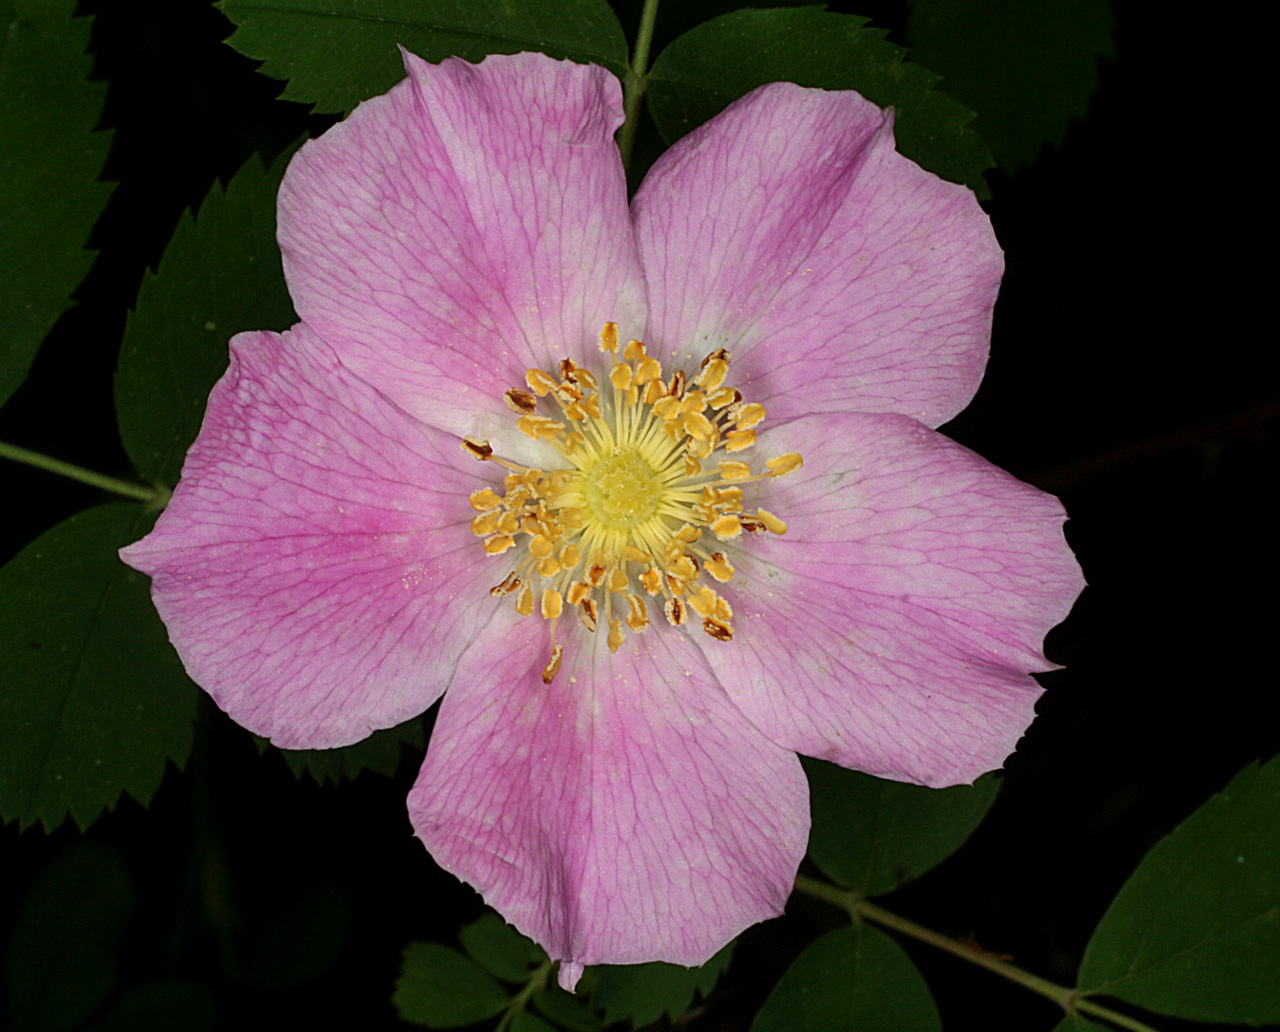 Pink flower with five petals and plentiful yellow stamens